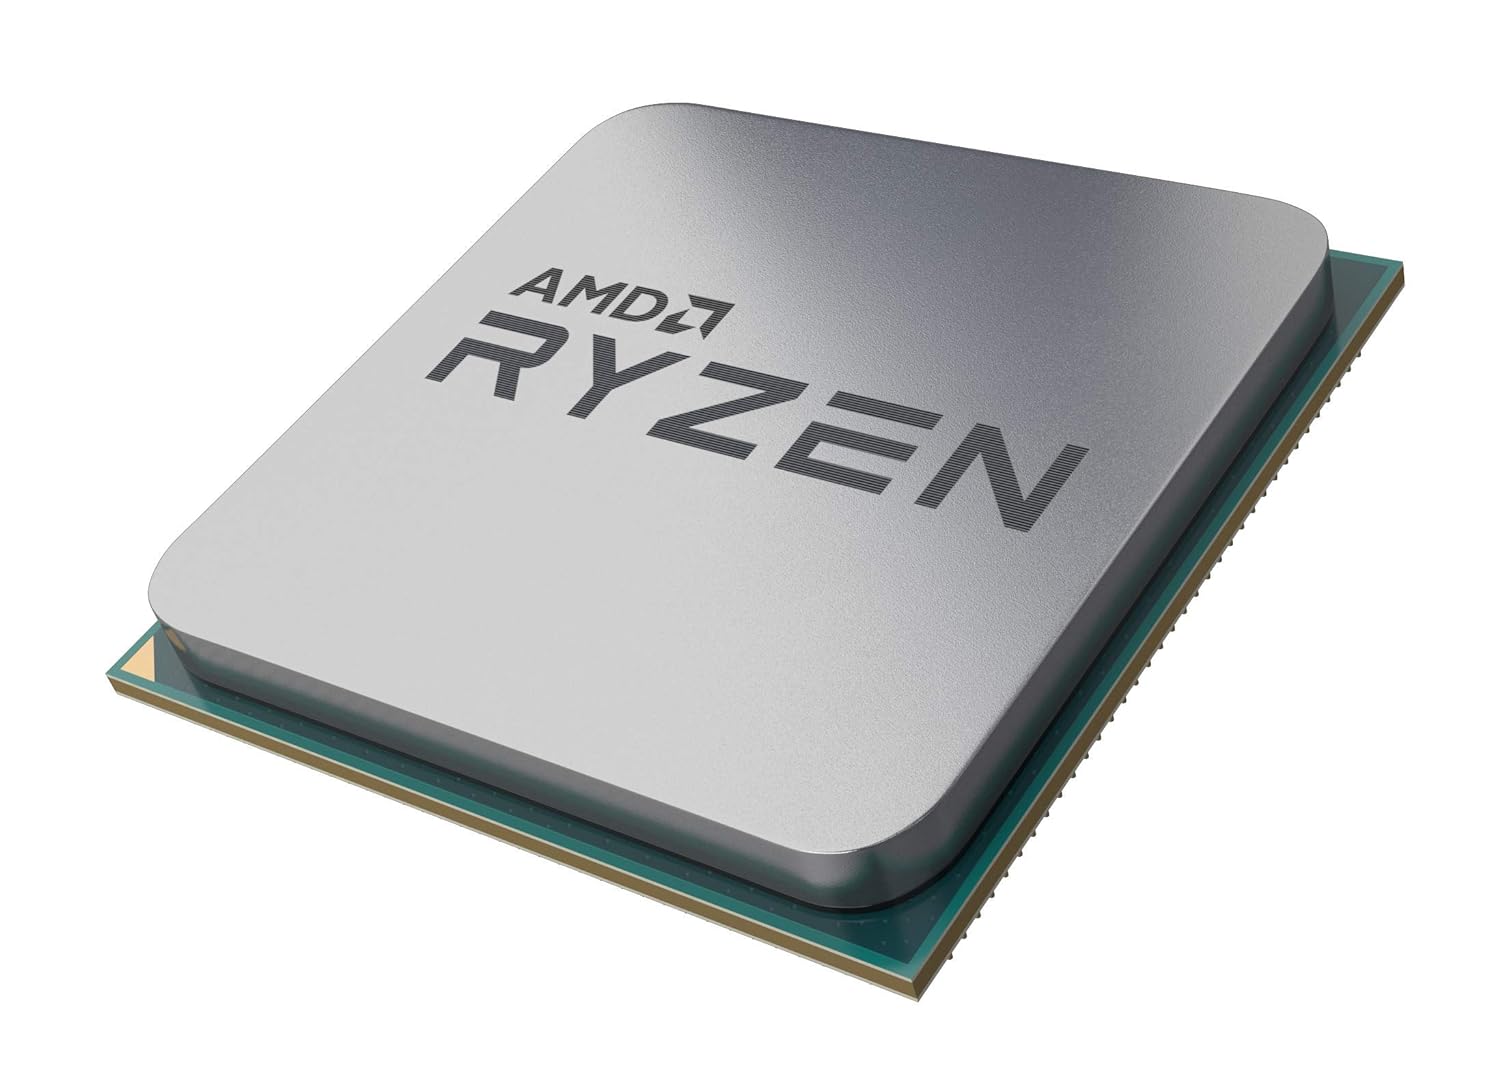 AMD Ryzen 5 3600 6-Core Desktop Processor with 4.2 GHz Turbo Boost Frequency and 32 MB L3 Cache, Socket AM4, 7nm Fabrication Process, 65W TDP - Compatible with DDR4-3200 Memory, PCI Express 4.0 - No Integrated GPU